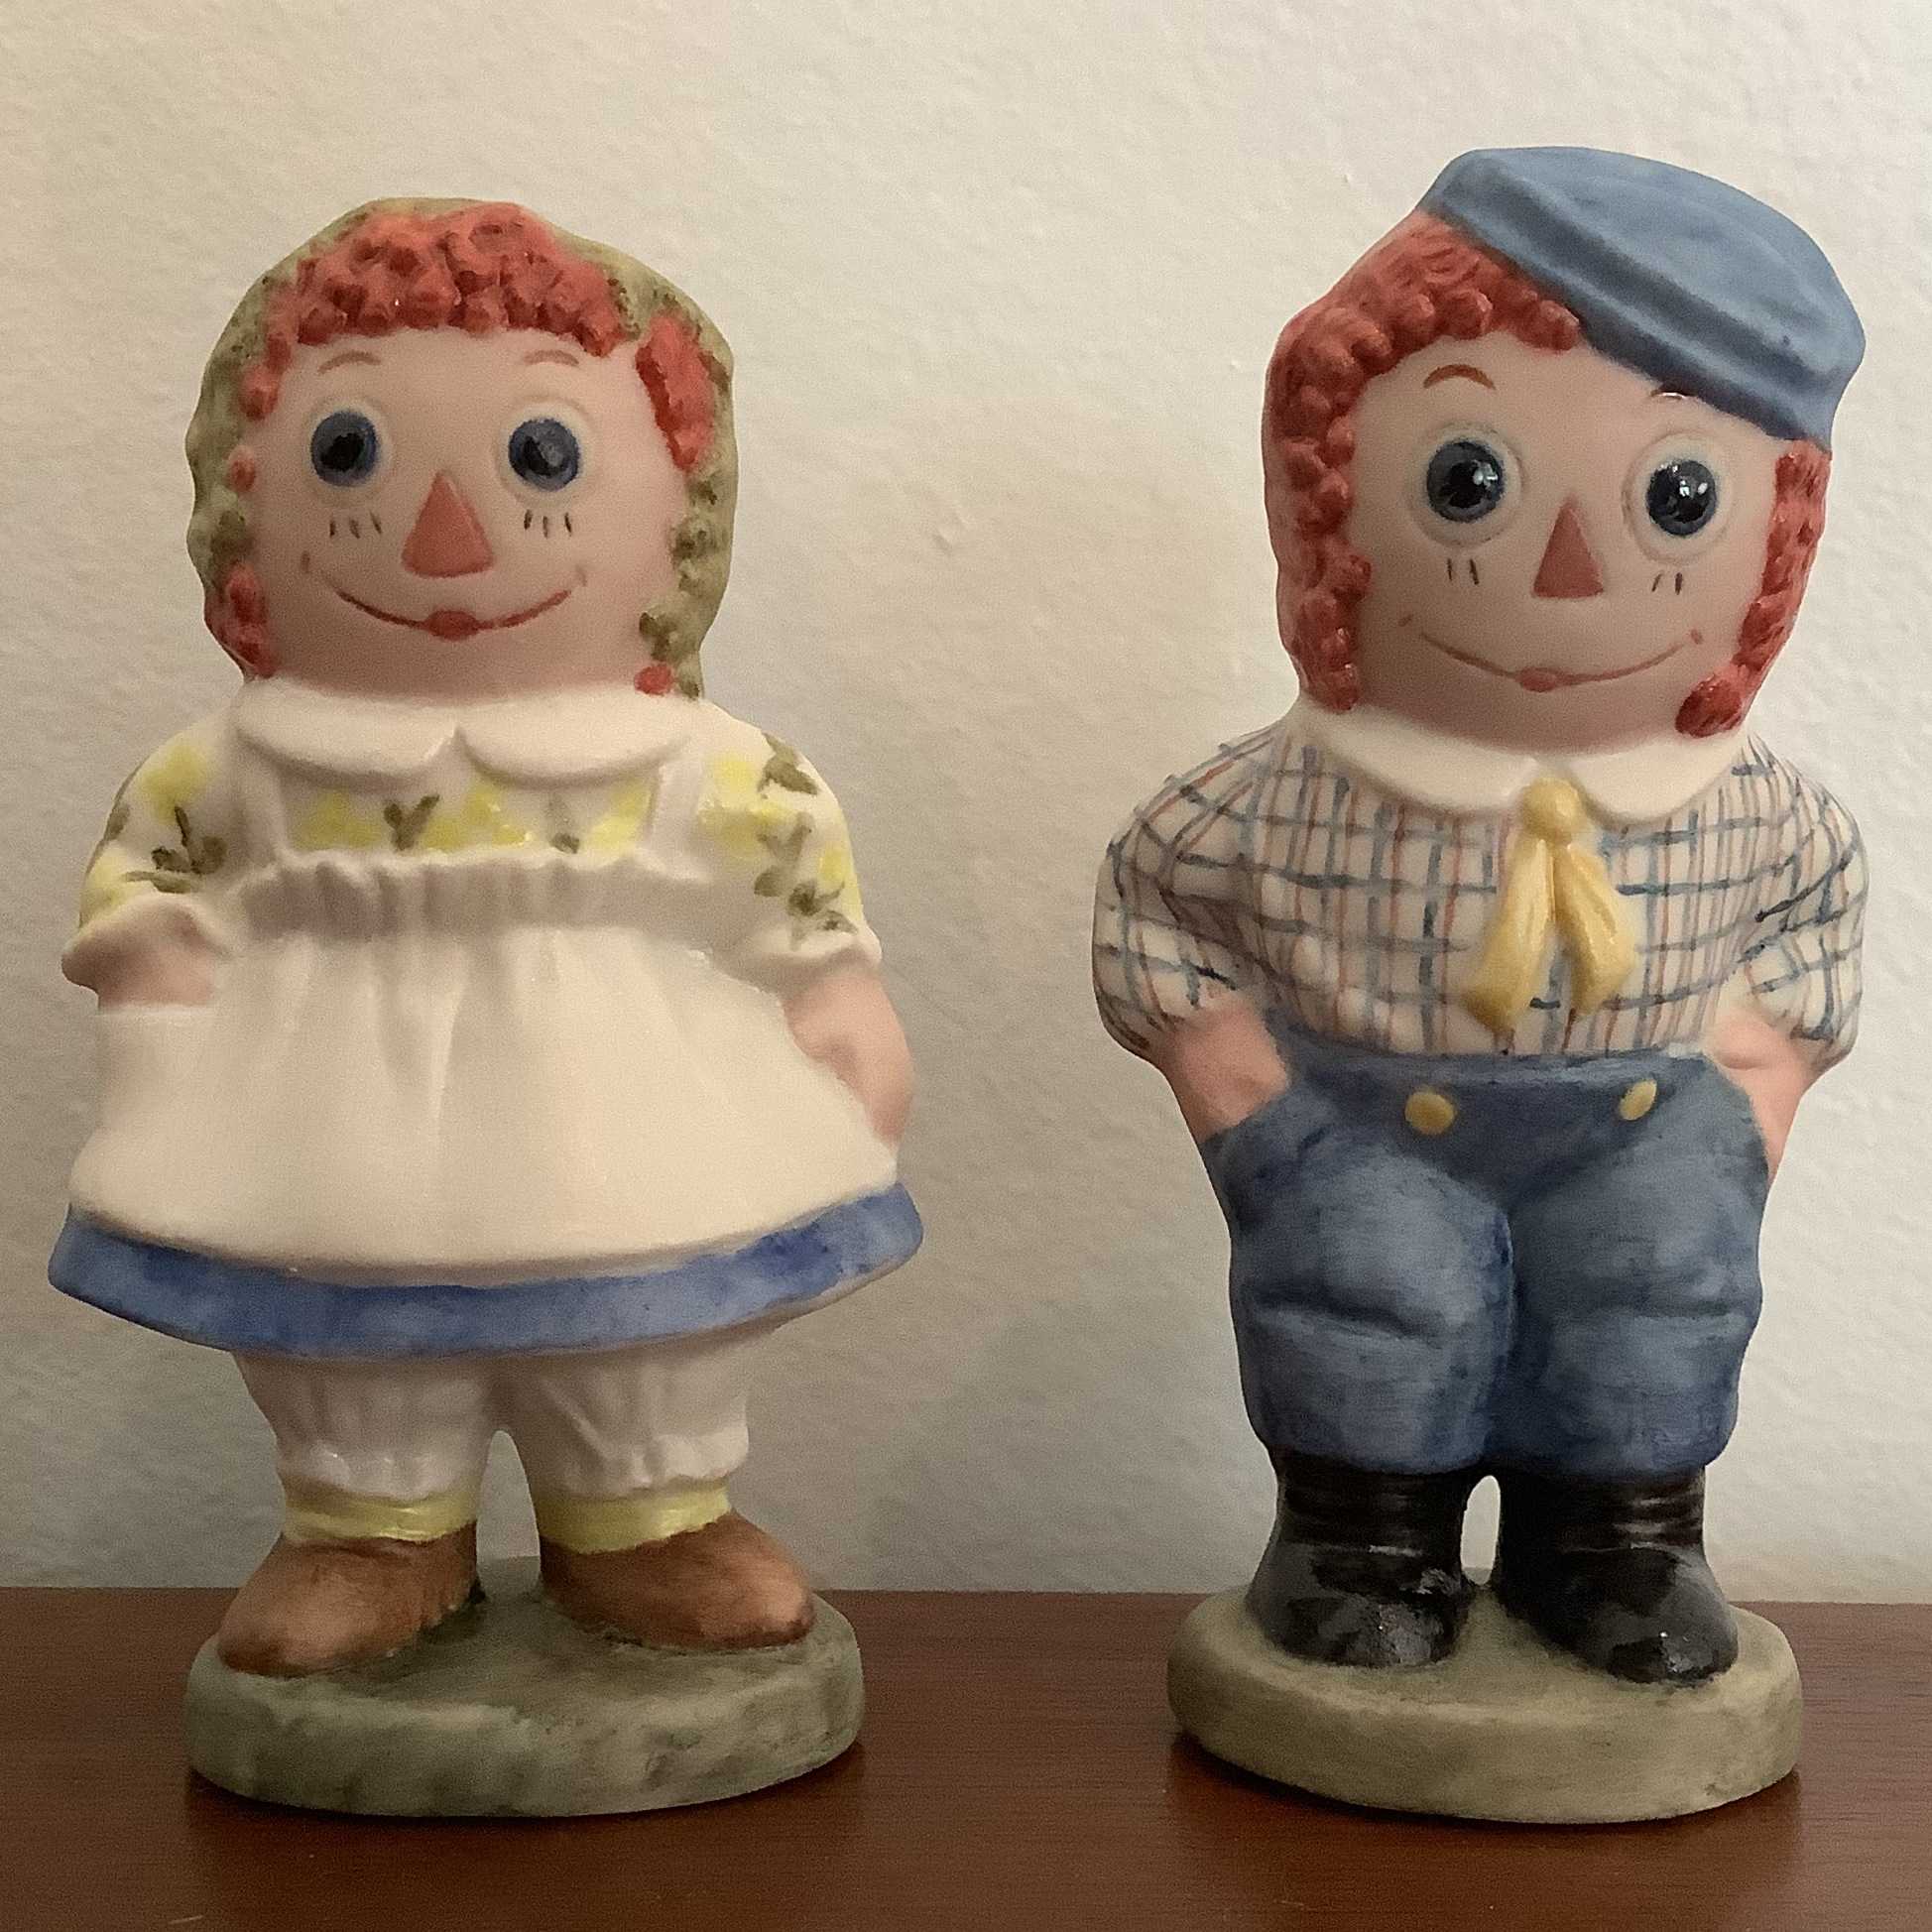 Porcelain Raggedy Ann and Andy figurines, front view